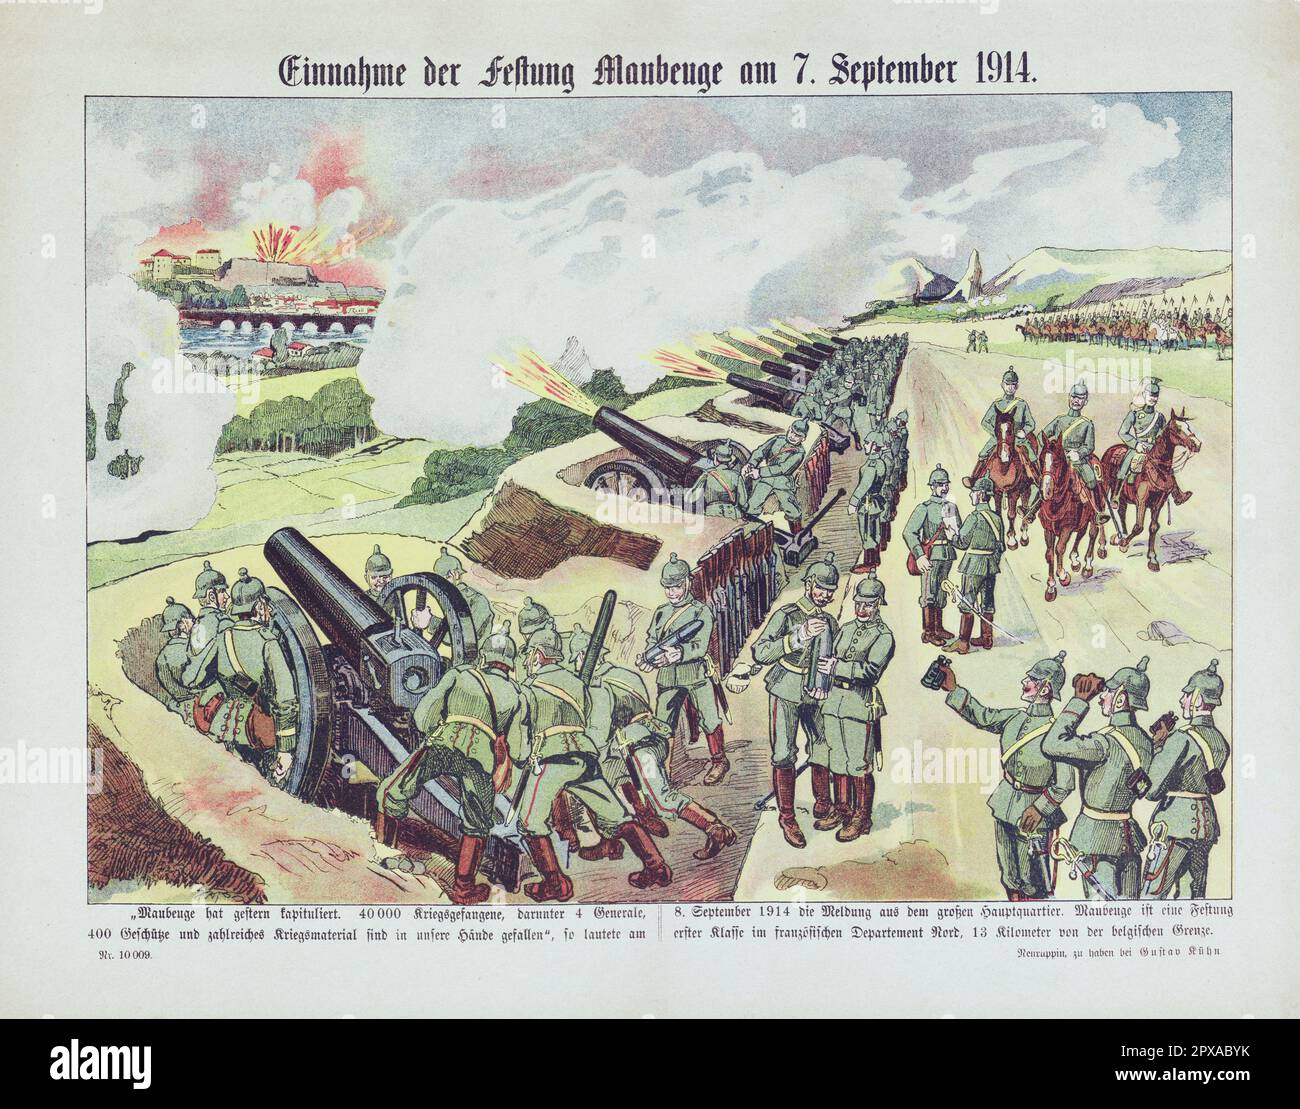 German propaganda lithography poster: Capture of the fortress of Maubeuge on 7 September 1914. 1914 The siege of Maubeuge took place from 24 August – 7 September 1914, at the Entrenched Camp of Maubeuge the start of the First World War on the Western Front. Stock Photo